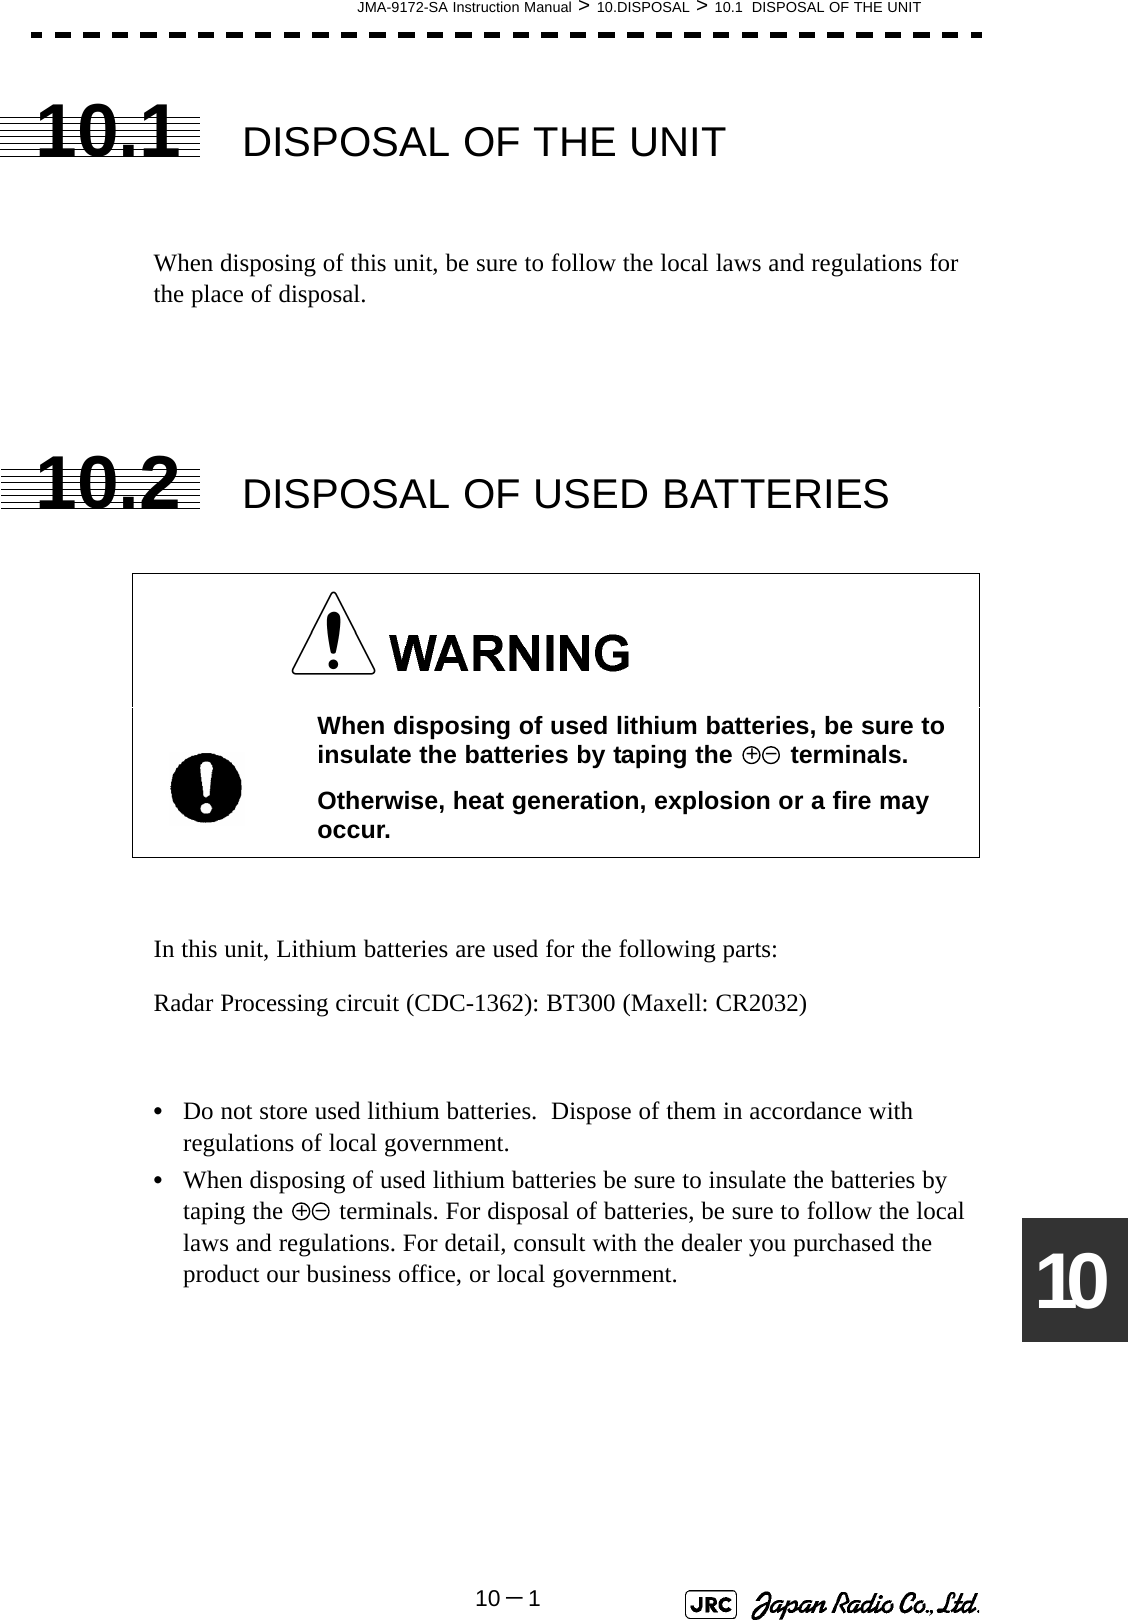 JMA-9172-SA Instruction Manual &gt; 10.DISPOSAL &gt; 10.1  DISPOSAL OF THE UNIT10－11010.1 DISPOSAL OF THE UNITWhen disposing of this unit, be sure to follow the local laws and regulations for the place of disposal. 10.2 DISPOSAL OF USED BATTERIESIn this unit, Lithium batteries are used for the following parts:Radar Processing circuit (CDC-1362): BT300 (Maxell: CR2032)•Do not store used lithium batteries.  Dispose of them in accordance with regulations of local government.•When disposing of used lithium batteries be sure to insulate the batteries by taping the   terminals. For disposal of batteries, be sure to follow the local laws and regulations. For detail, consult with the dealer you purchased the product our business office, or local government. When disposing of used lithium batteries, be sure to insulate the batteries by taping the   terminals.Otherwise, heat generation, explosion or a fire may occur.+ -+ -